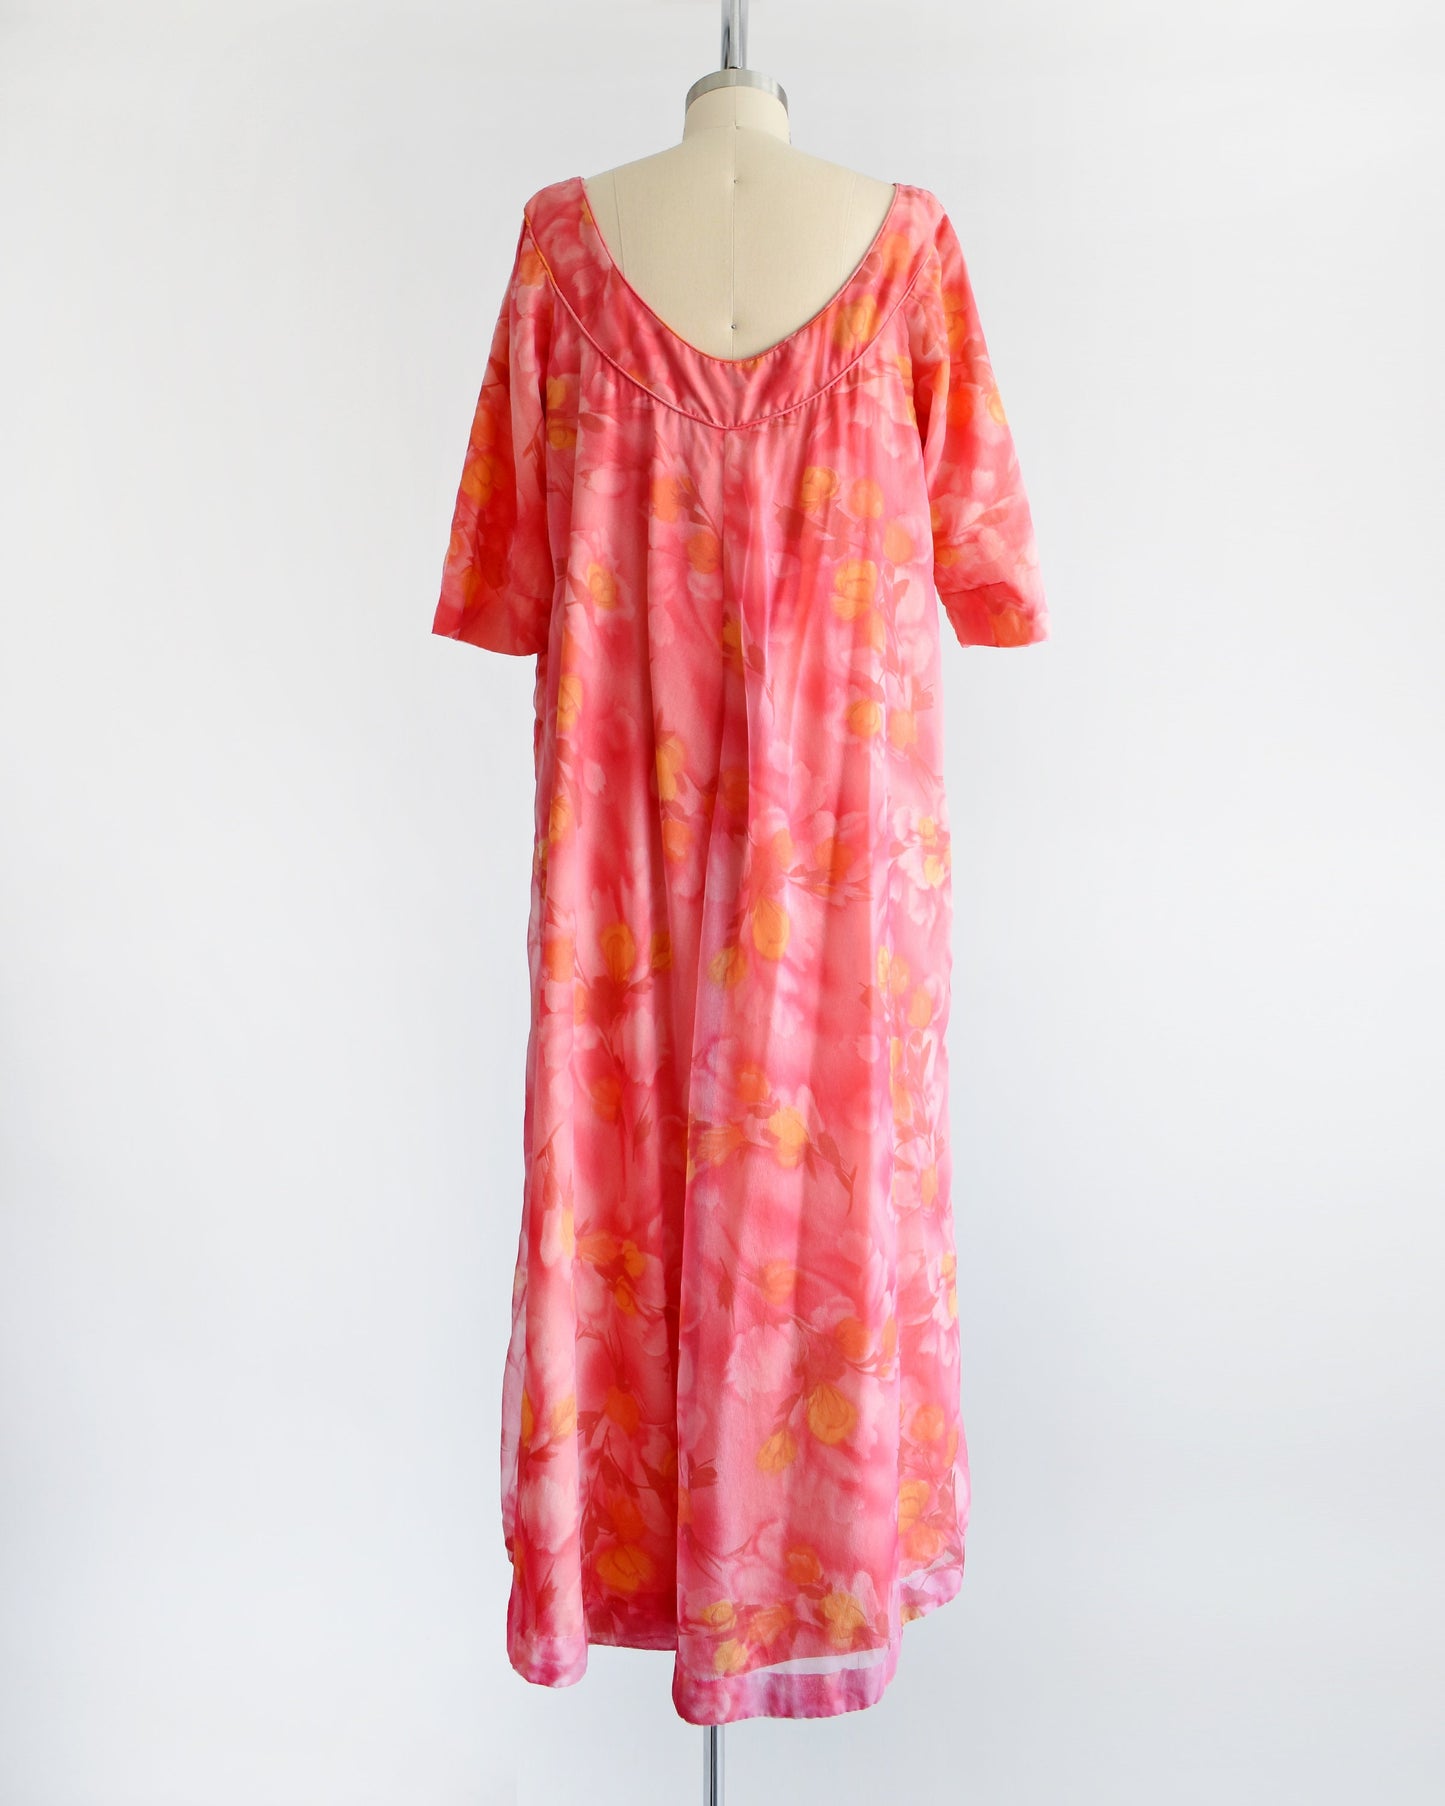 Back view of a vintage floral maxi dress with pinks, dark red, orange, and yellow floral print. The dress has half sleeves and is on a dress form.